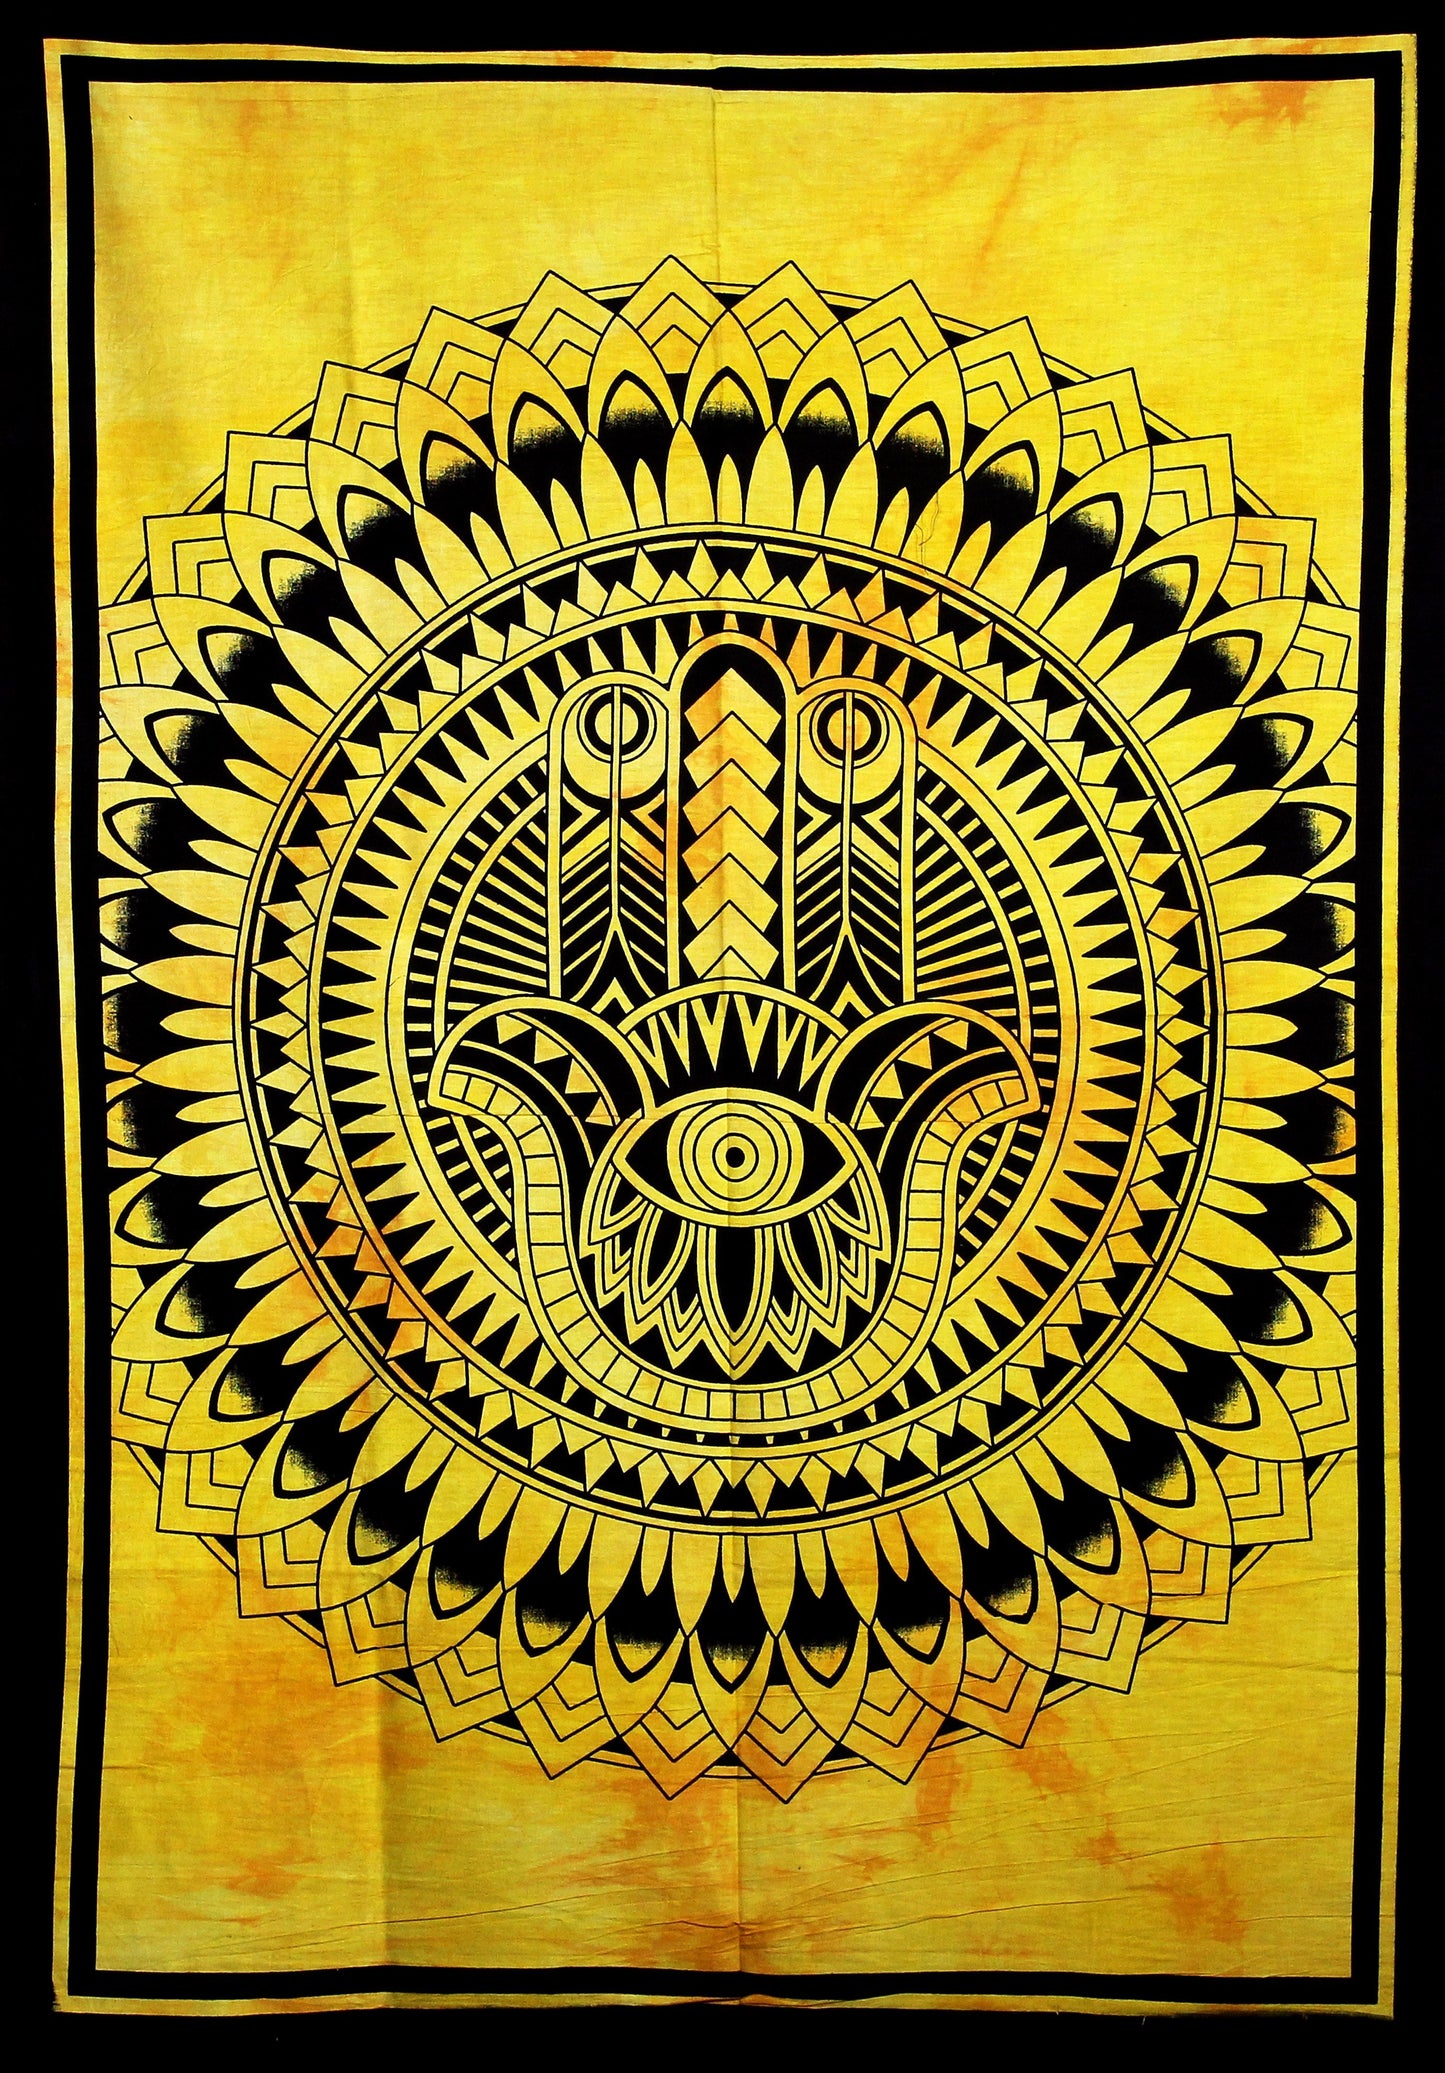 Hand printed Hamsa Fabric Poster Tapestry Wall Hanging - Available in 6 Colors